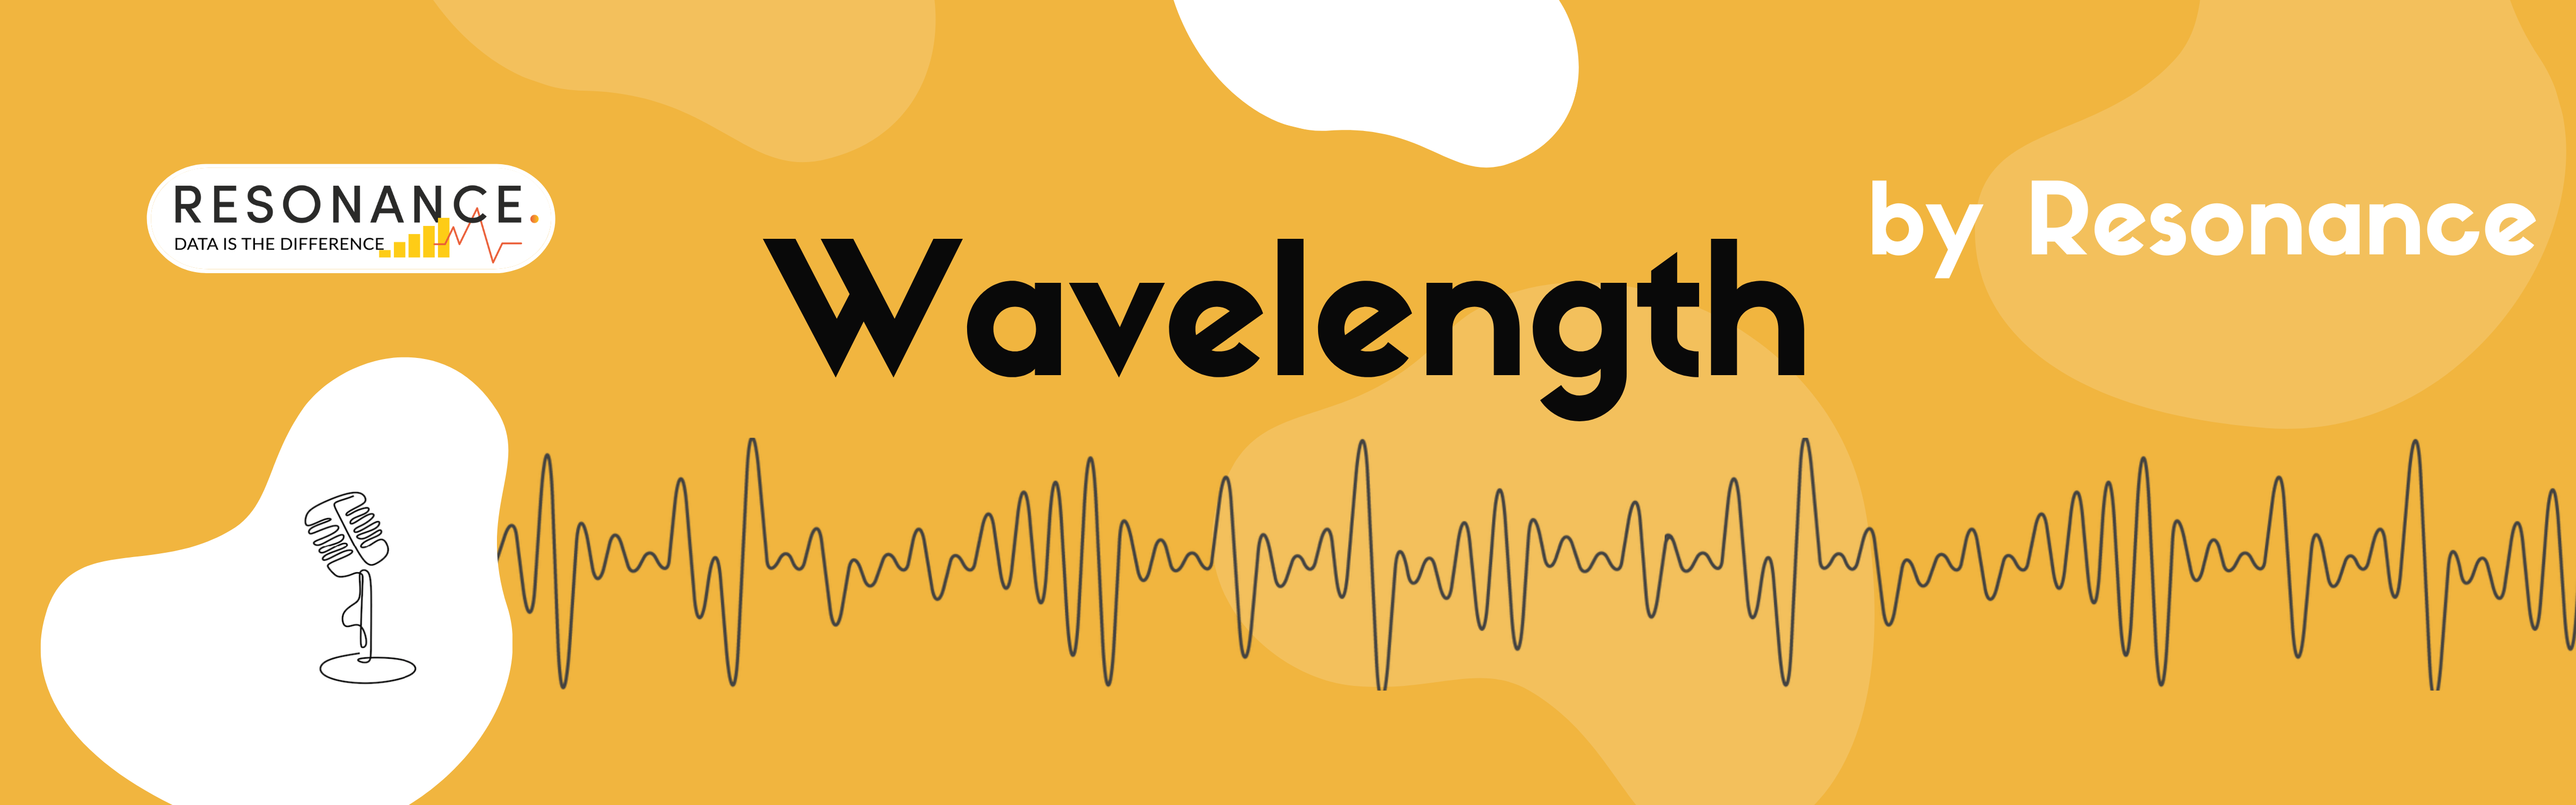 Wavelength - Twitter fights fires and ChatGPT waxes poetic